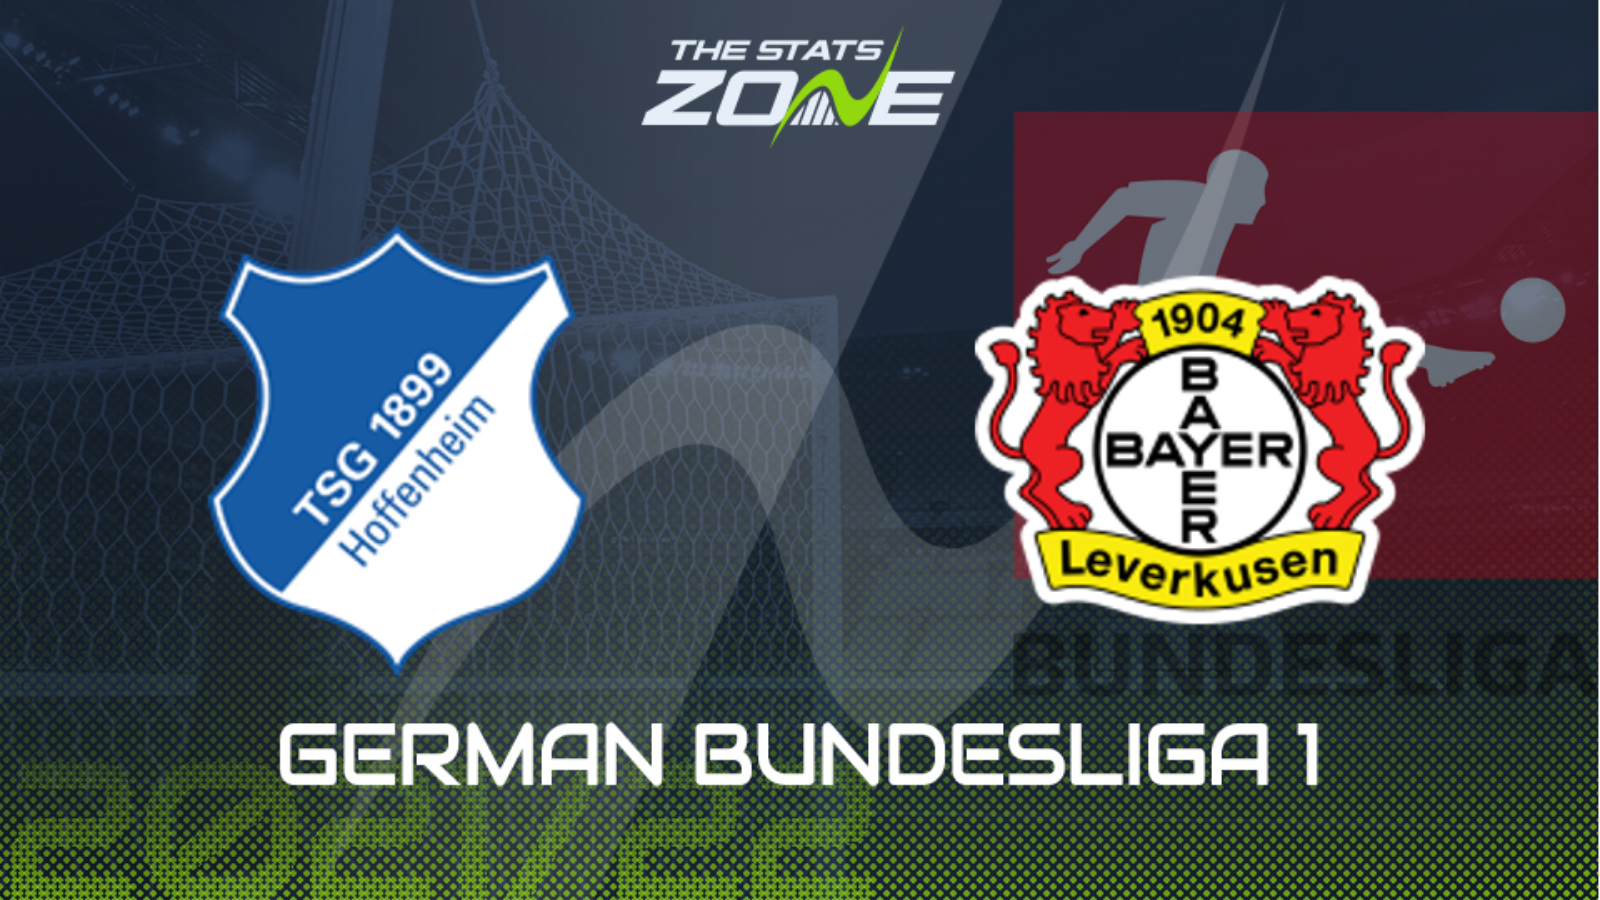 Hoffenheim vs leverkusen betting tips difference between back and lay betting